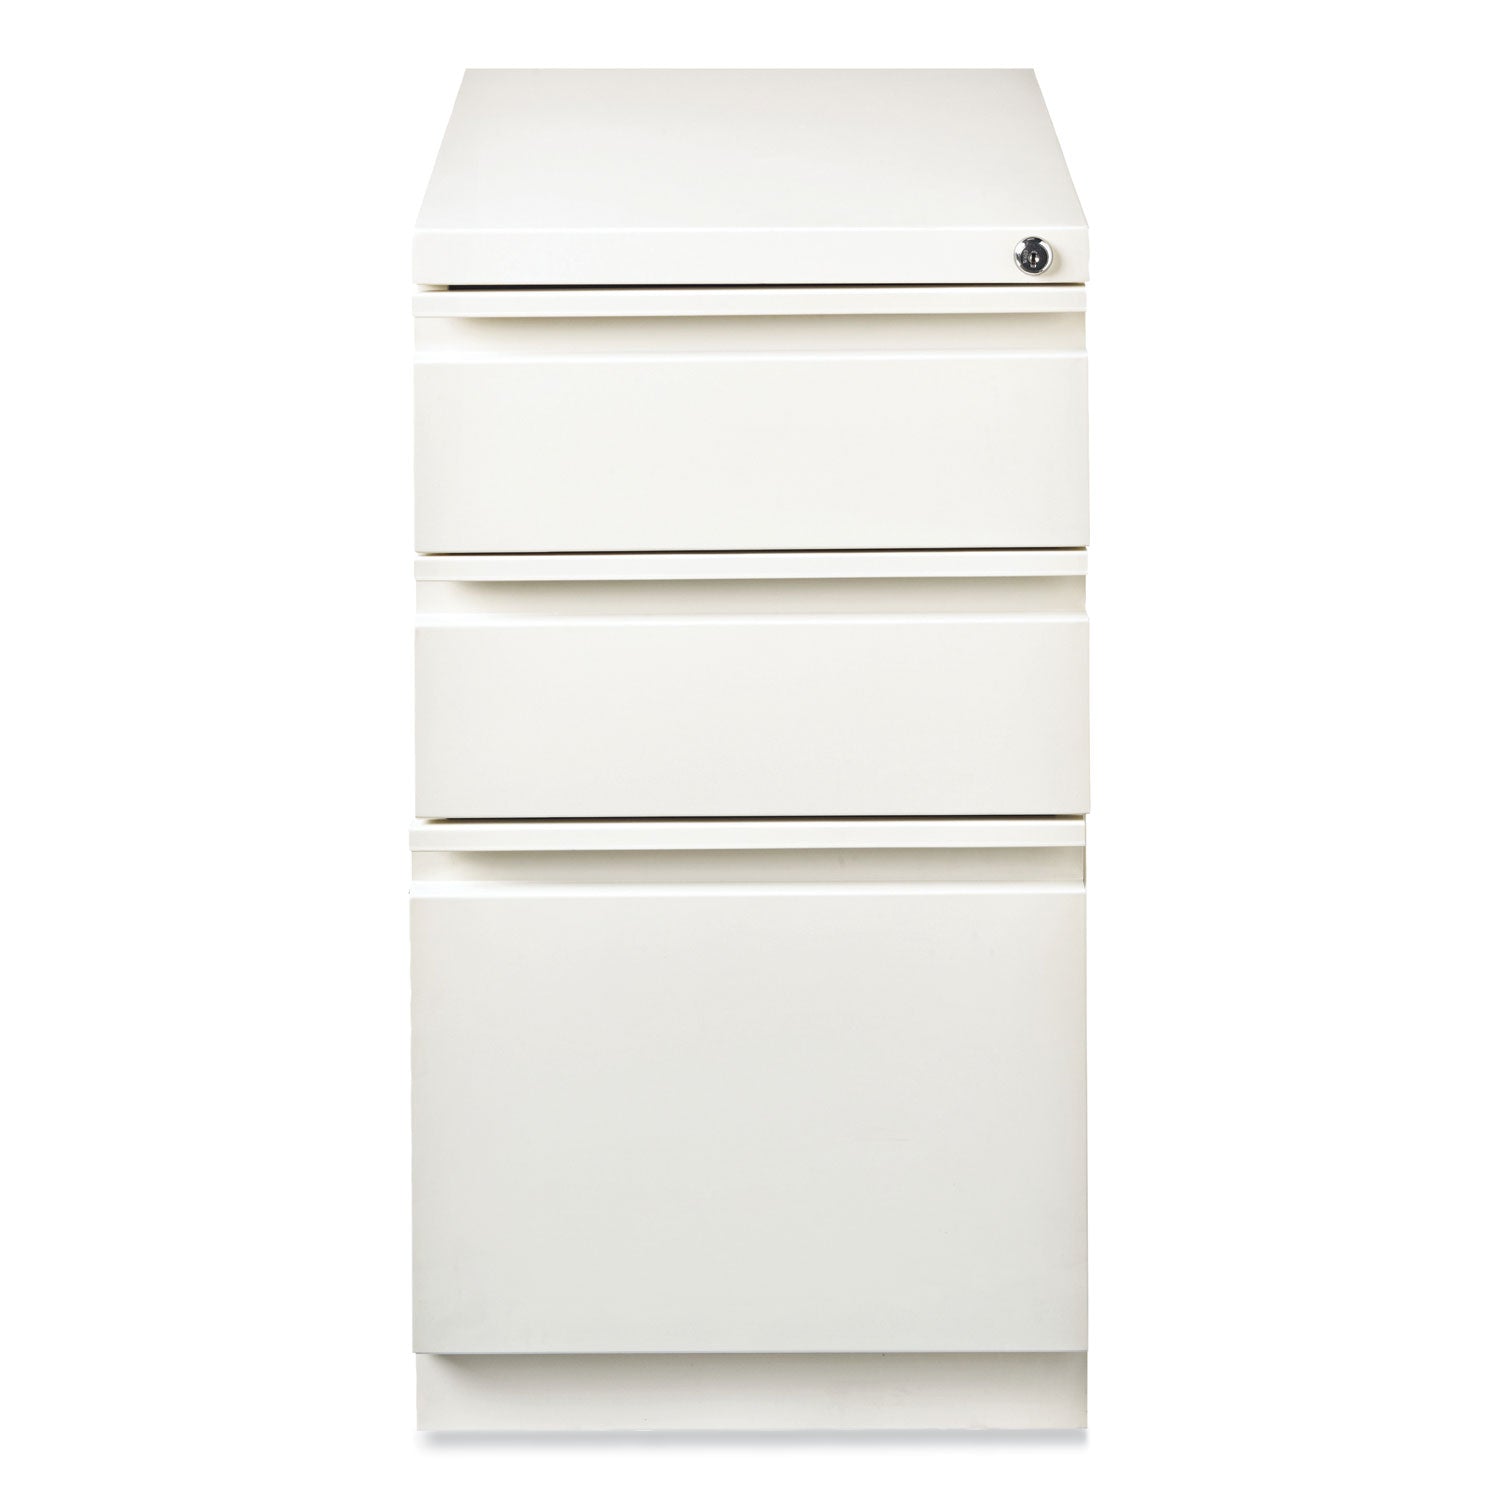 full-width-pull-20-deep-mobile-pedestal-file-box-box-file-letter-white-15-x-1988-x-2775-ships-in-4-6-business-days_hid19353 - 2